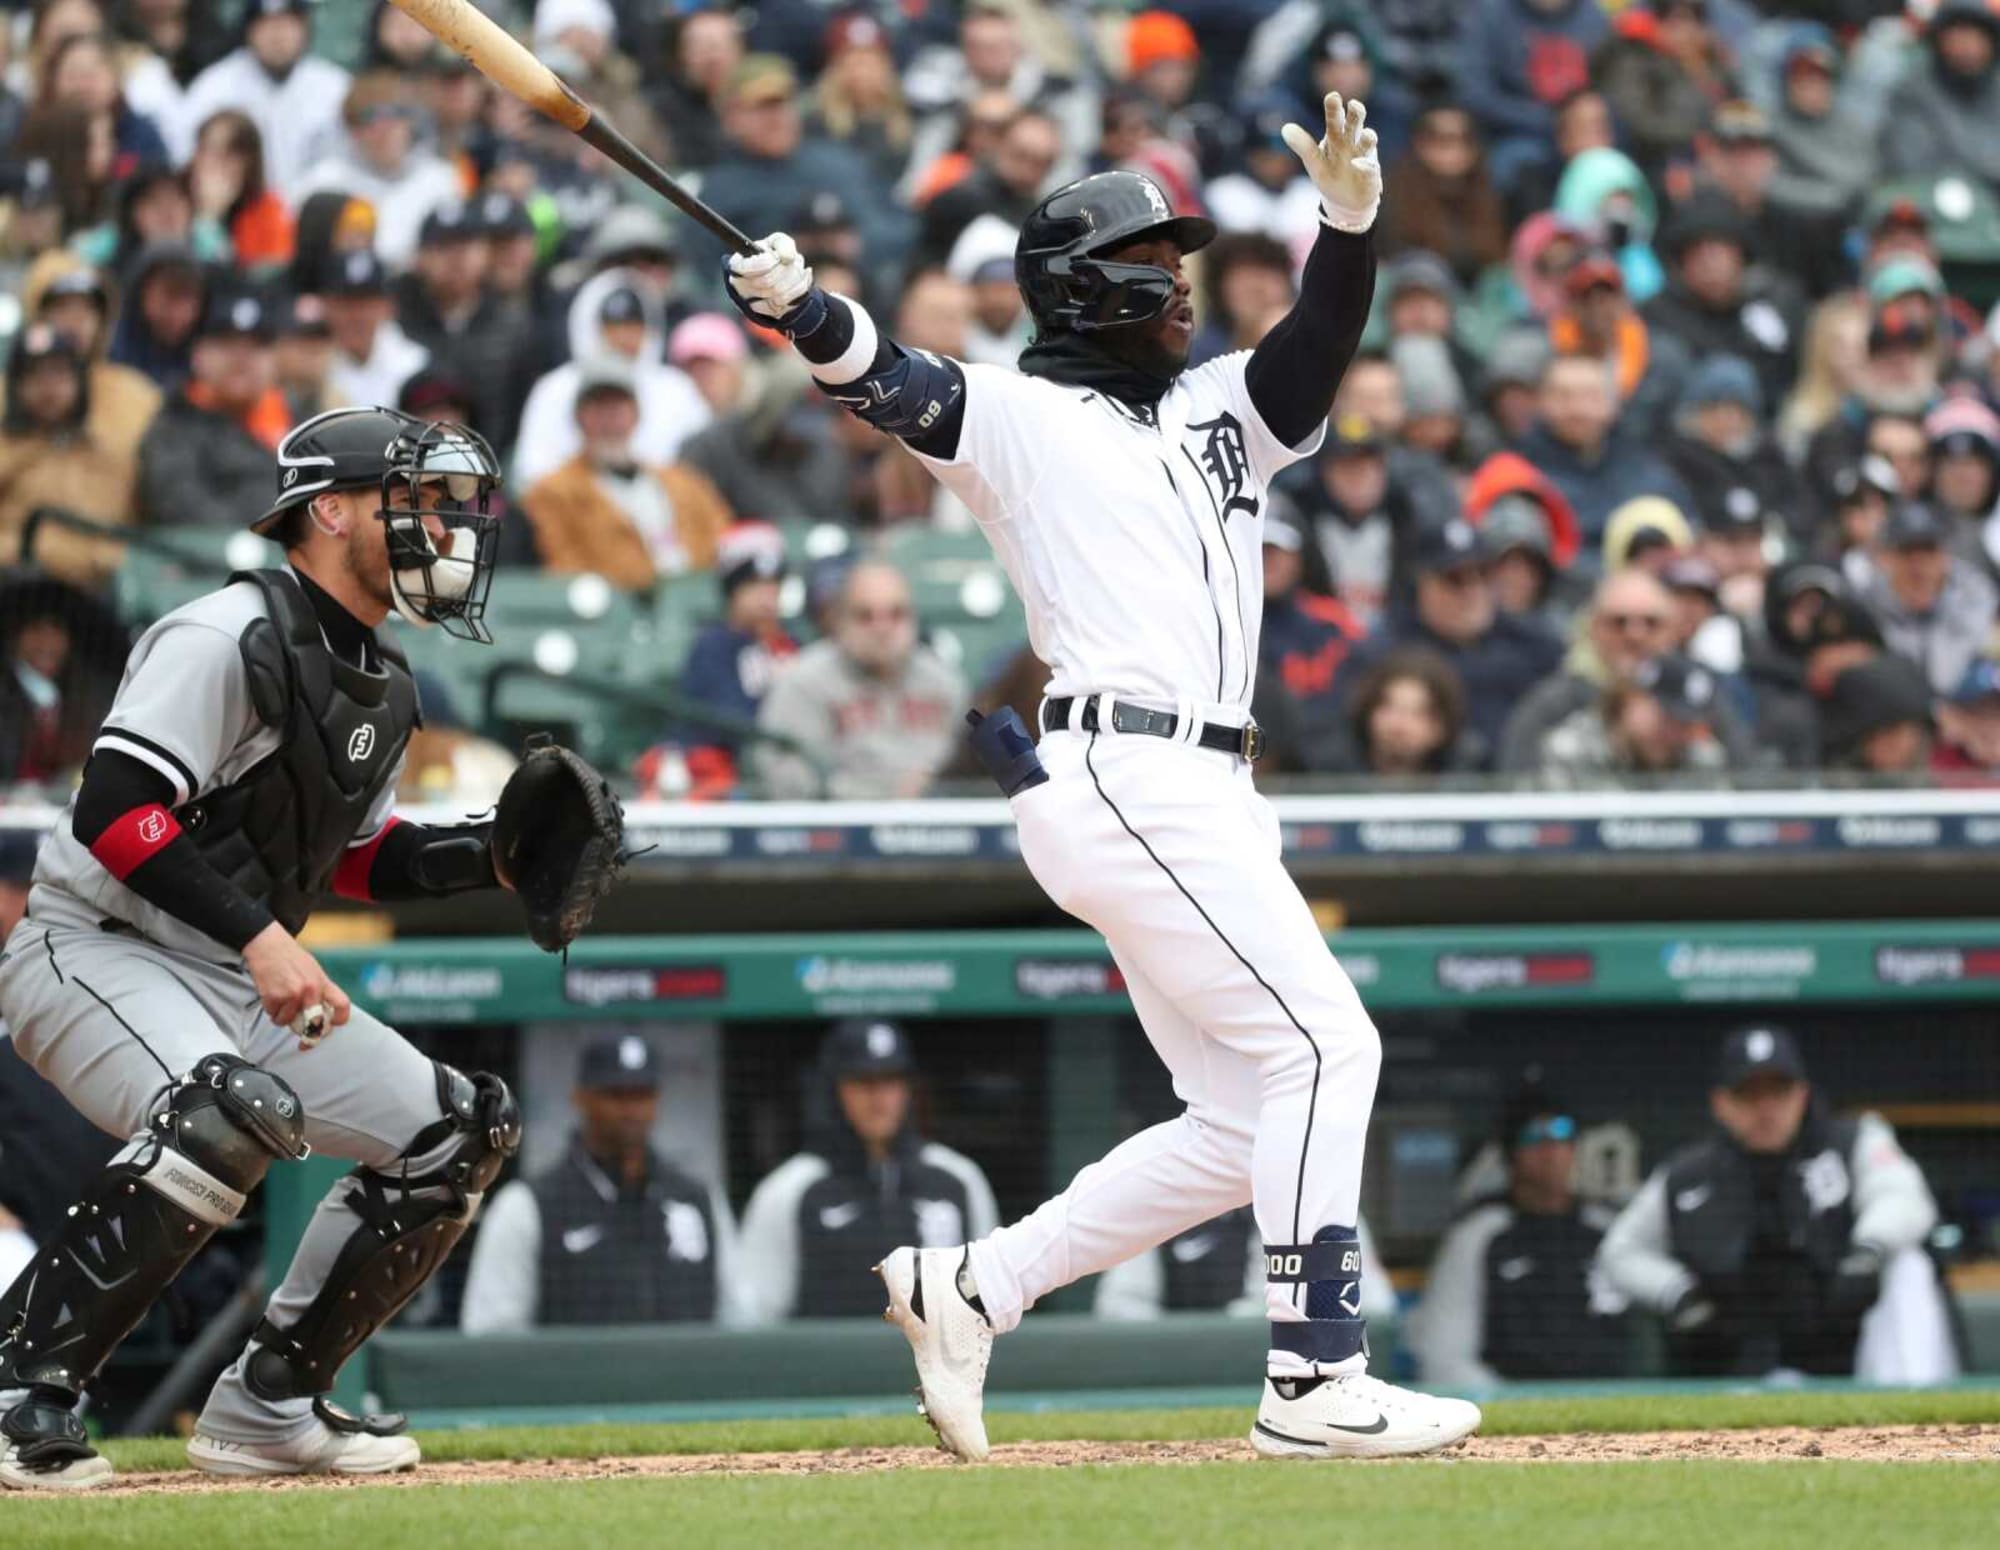 Detroit Tigers: Akil Baddoo is proving water always finds its level